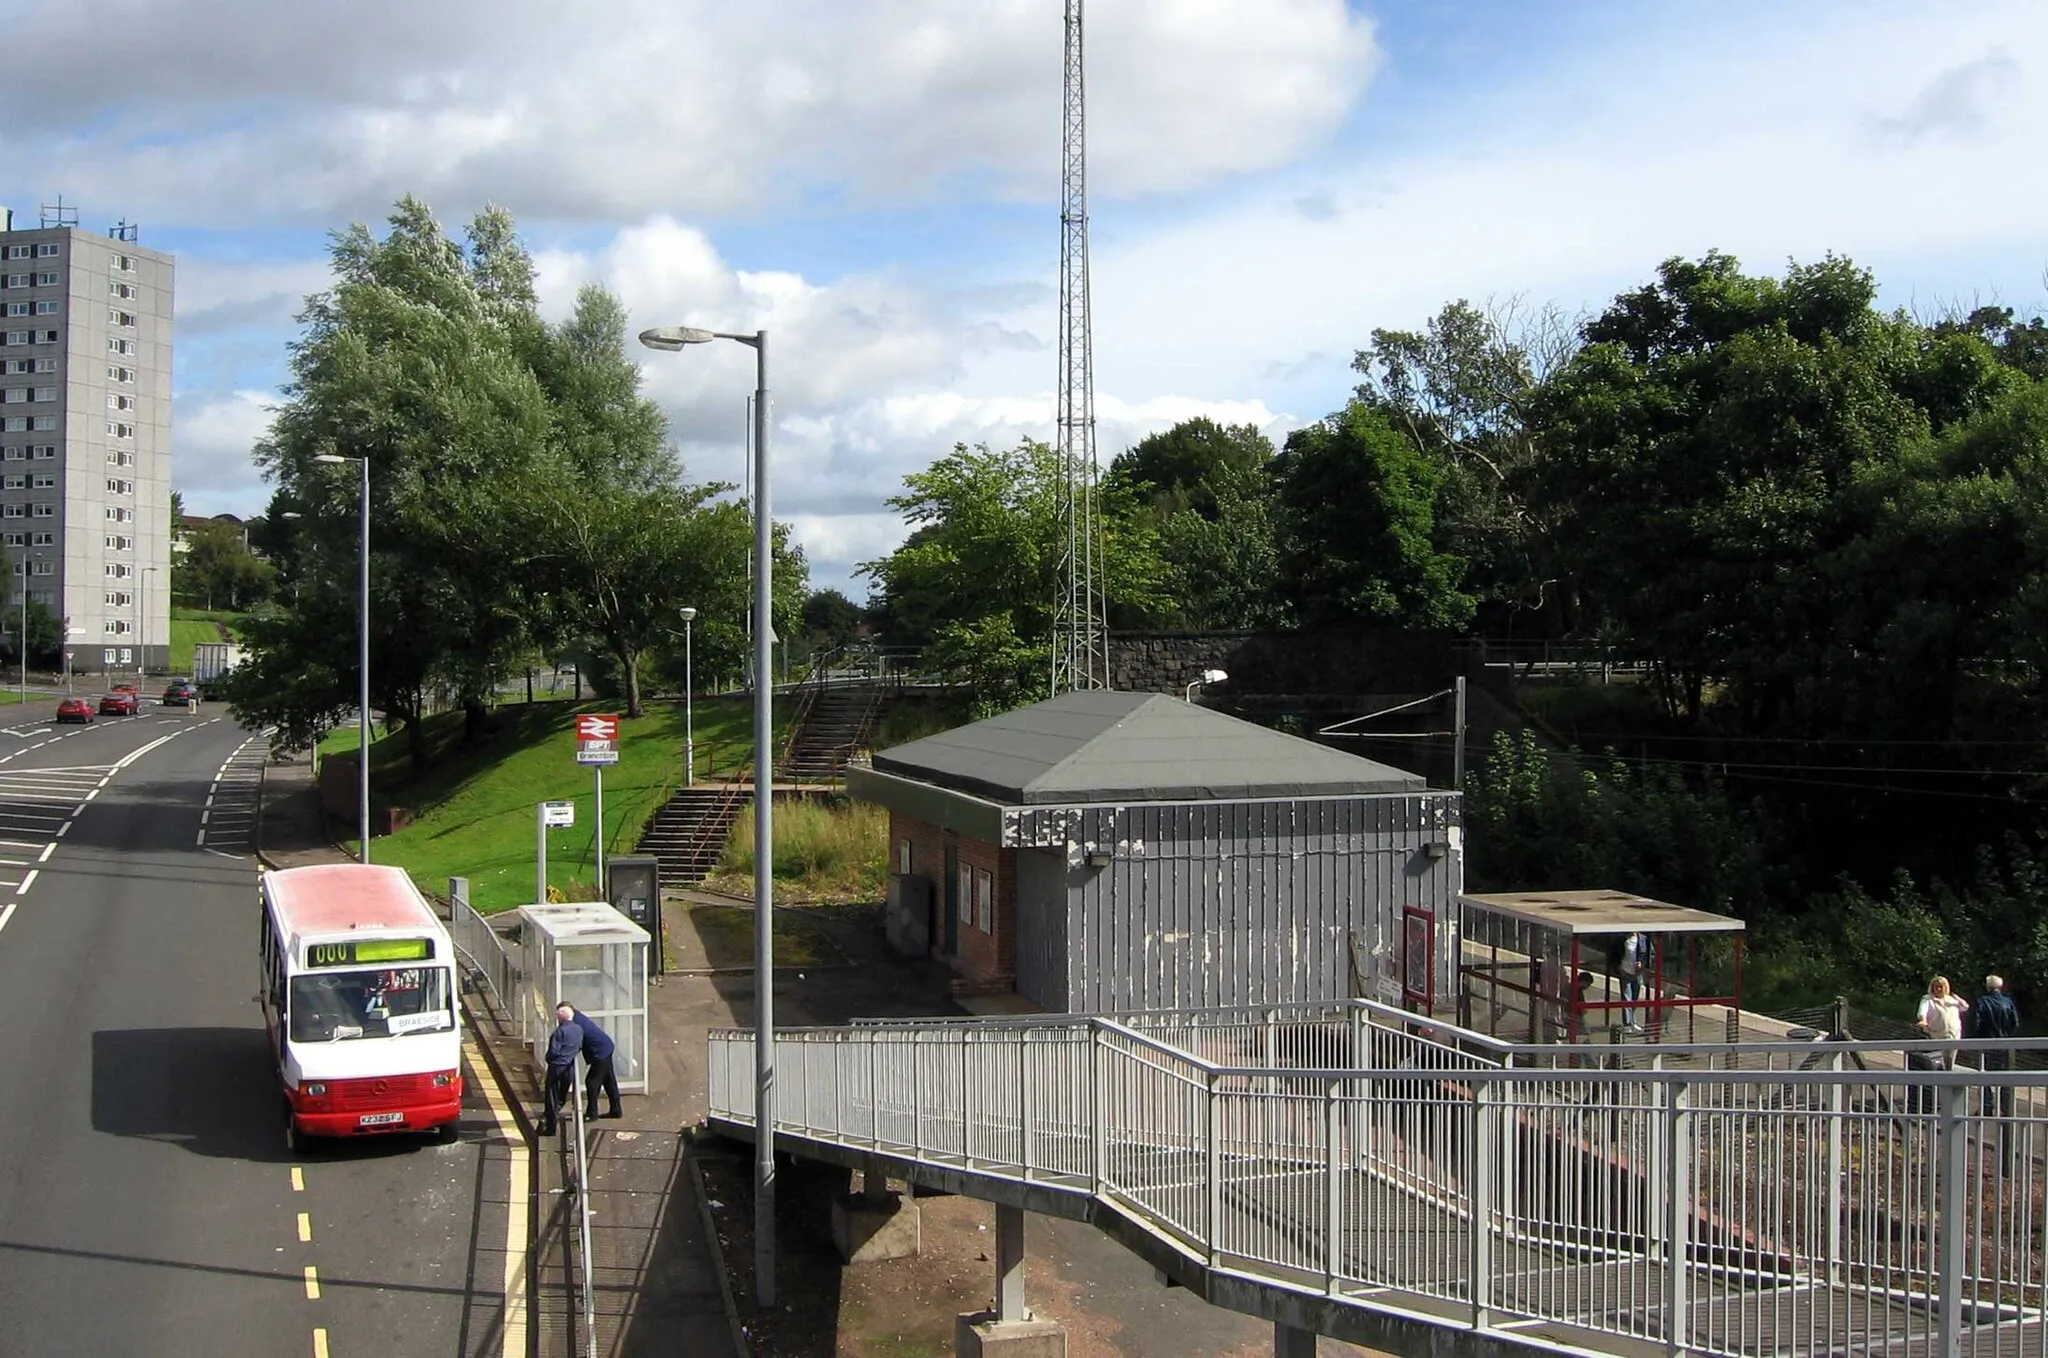 Photo showing: Branchton railway station lies on the edge of the Branchton area of Creenock, Scotland. View from the footbridge across the main road south to Inverkip, looking north towards Greenock town centre.